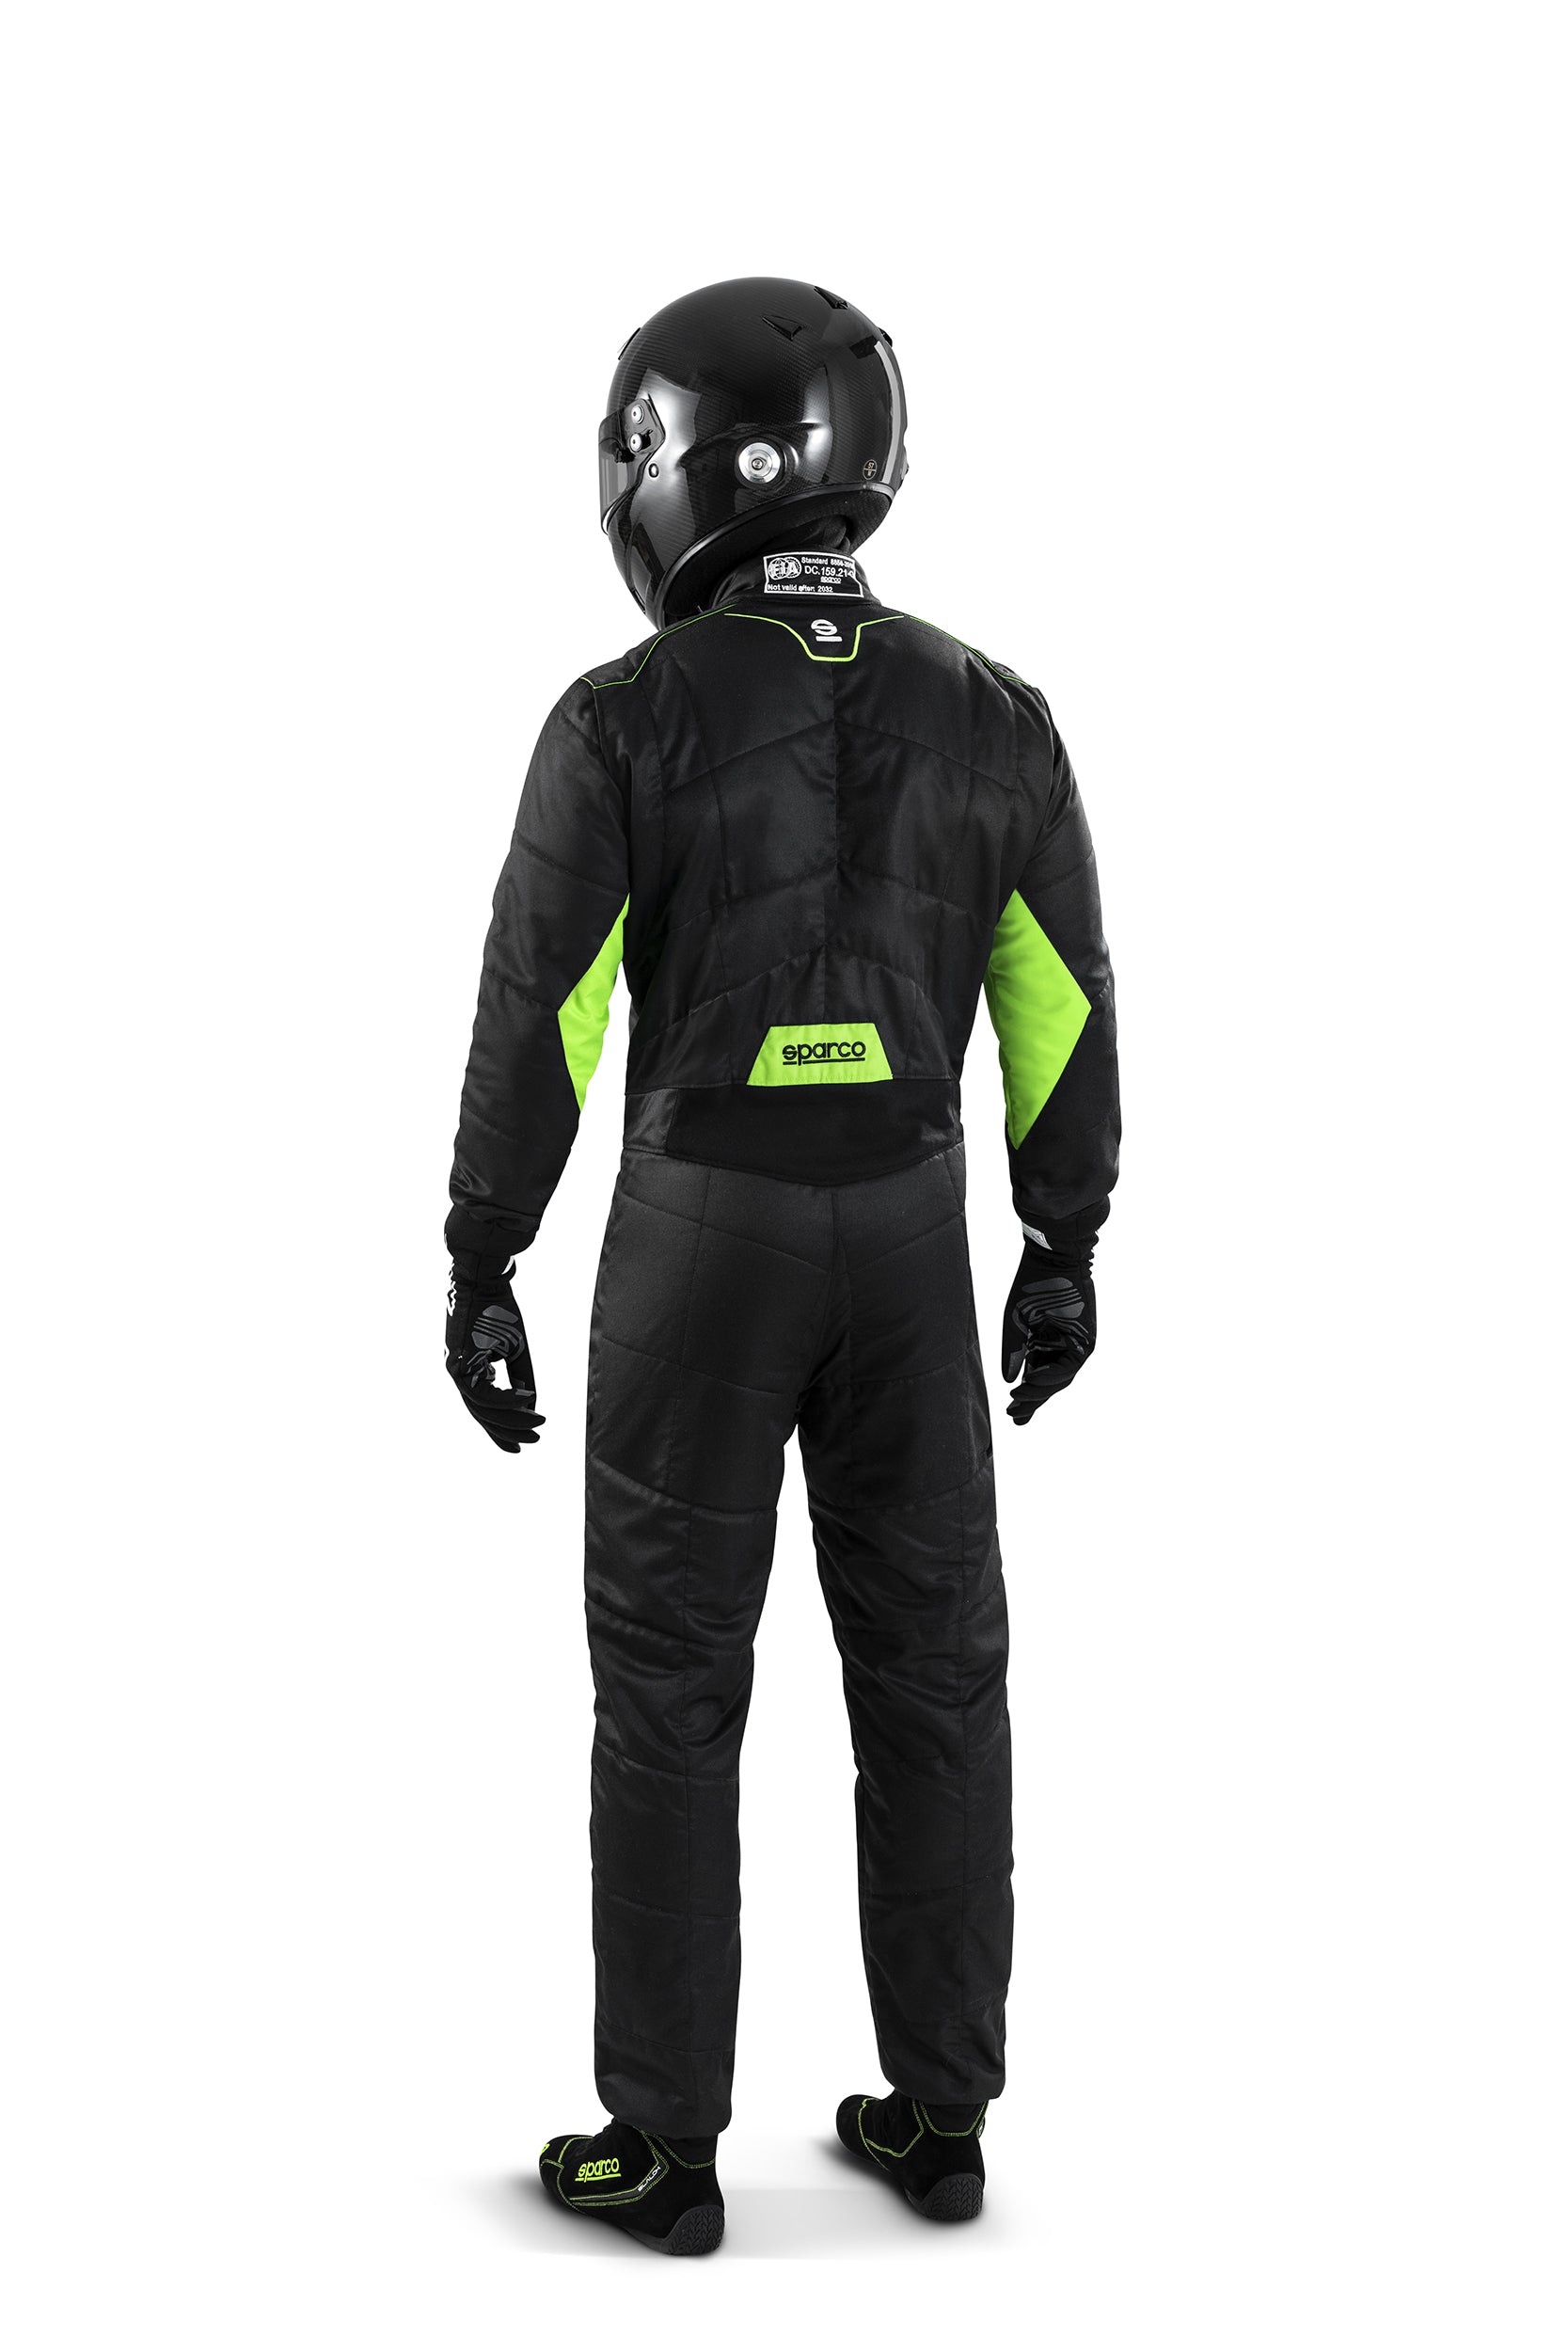 SPARCO 00109362NRVF SPRINT 2022 Racing suit, FIA 8856-2018, black/green, size 62 Photo-1 